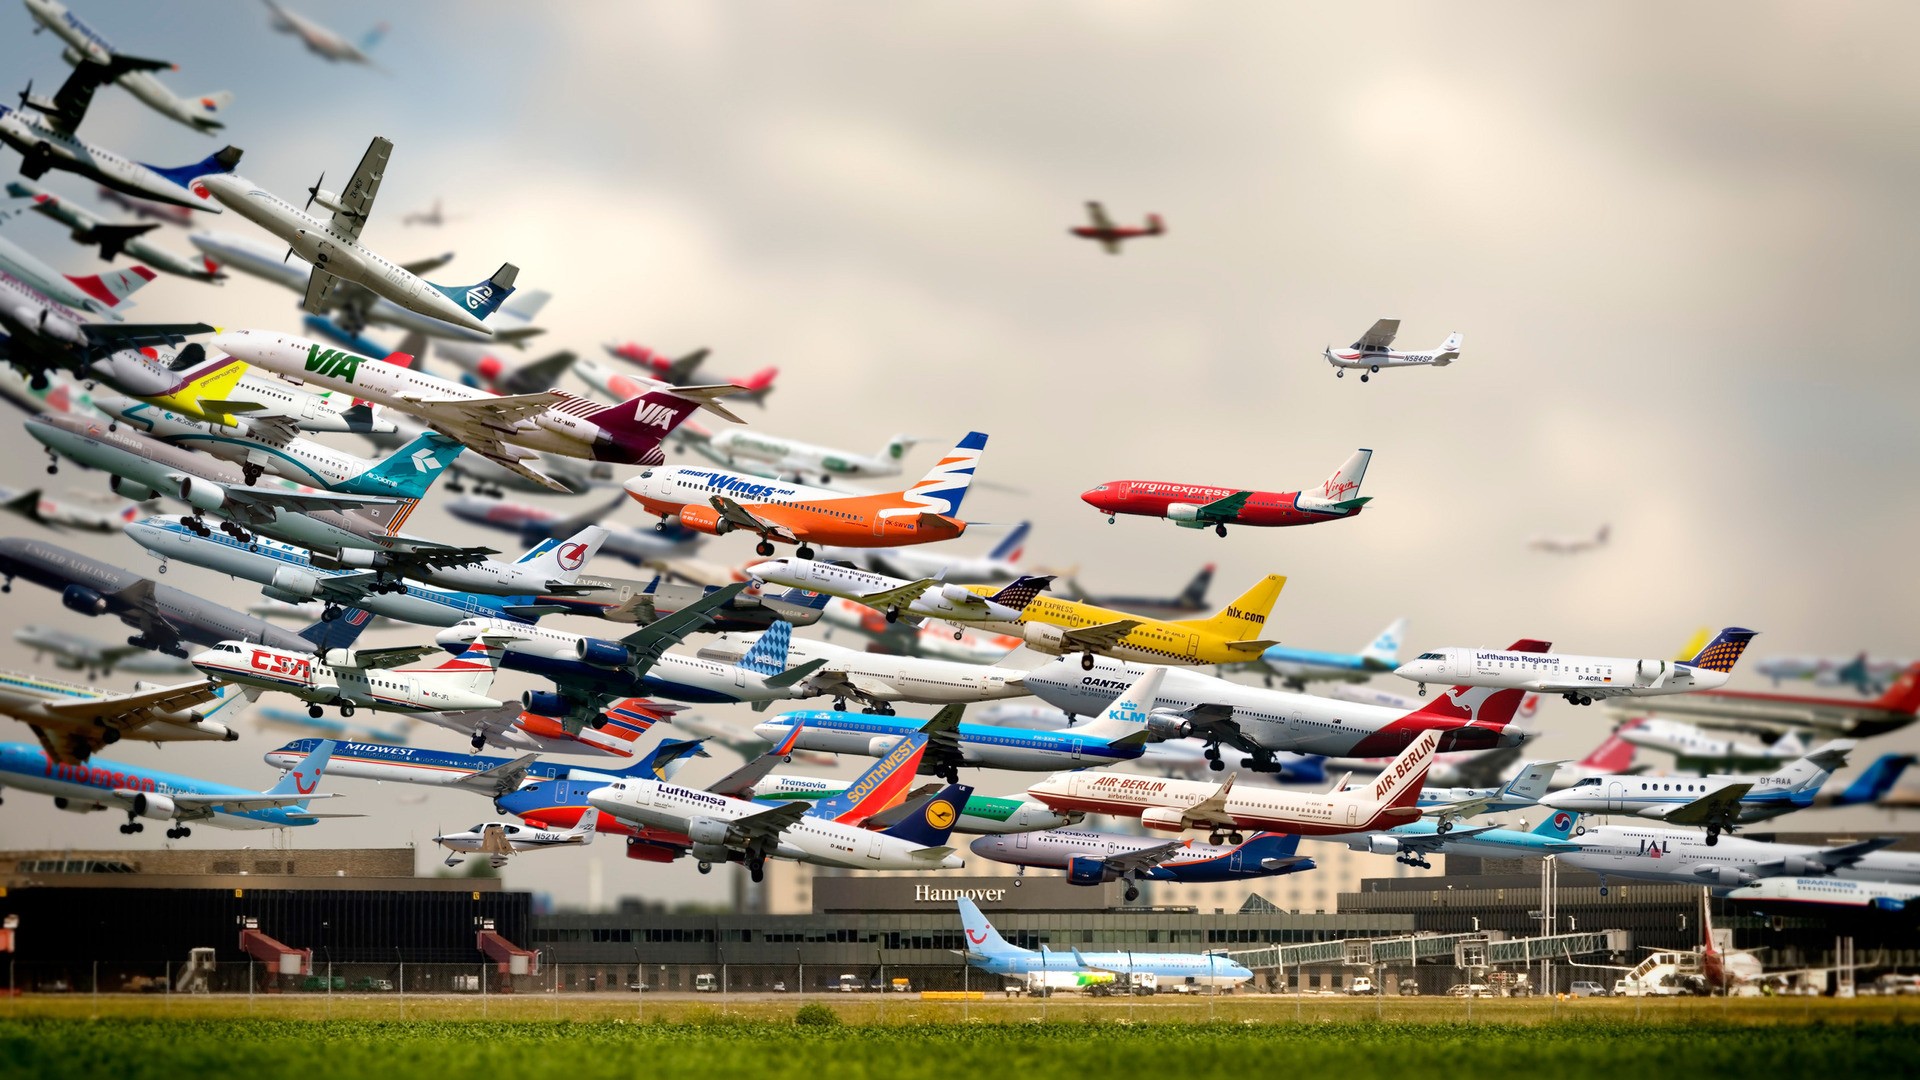 Airplane Photo Manipulation Digital Art Photography Collections 1920x1080